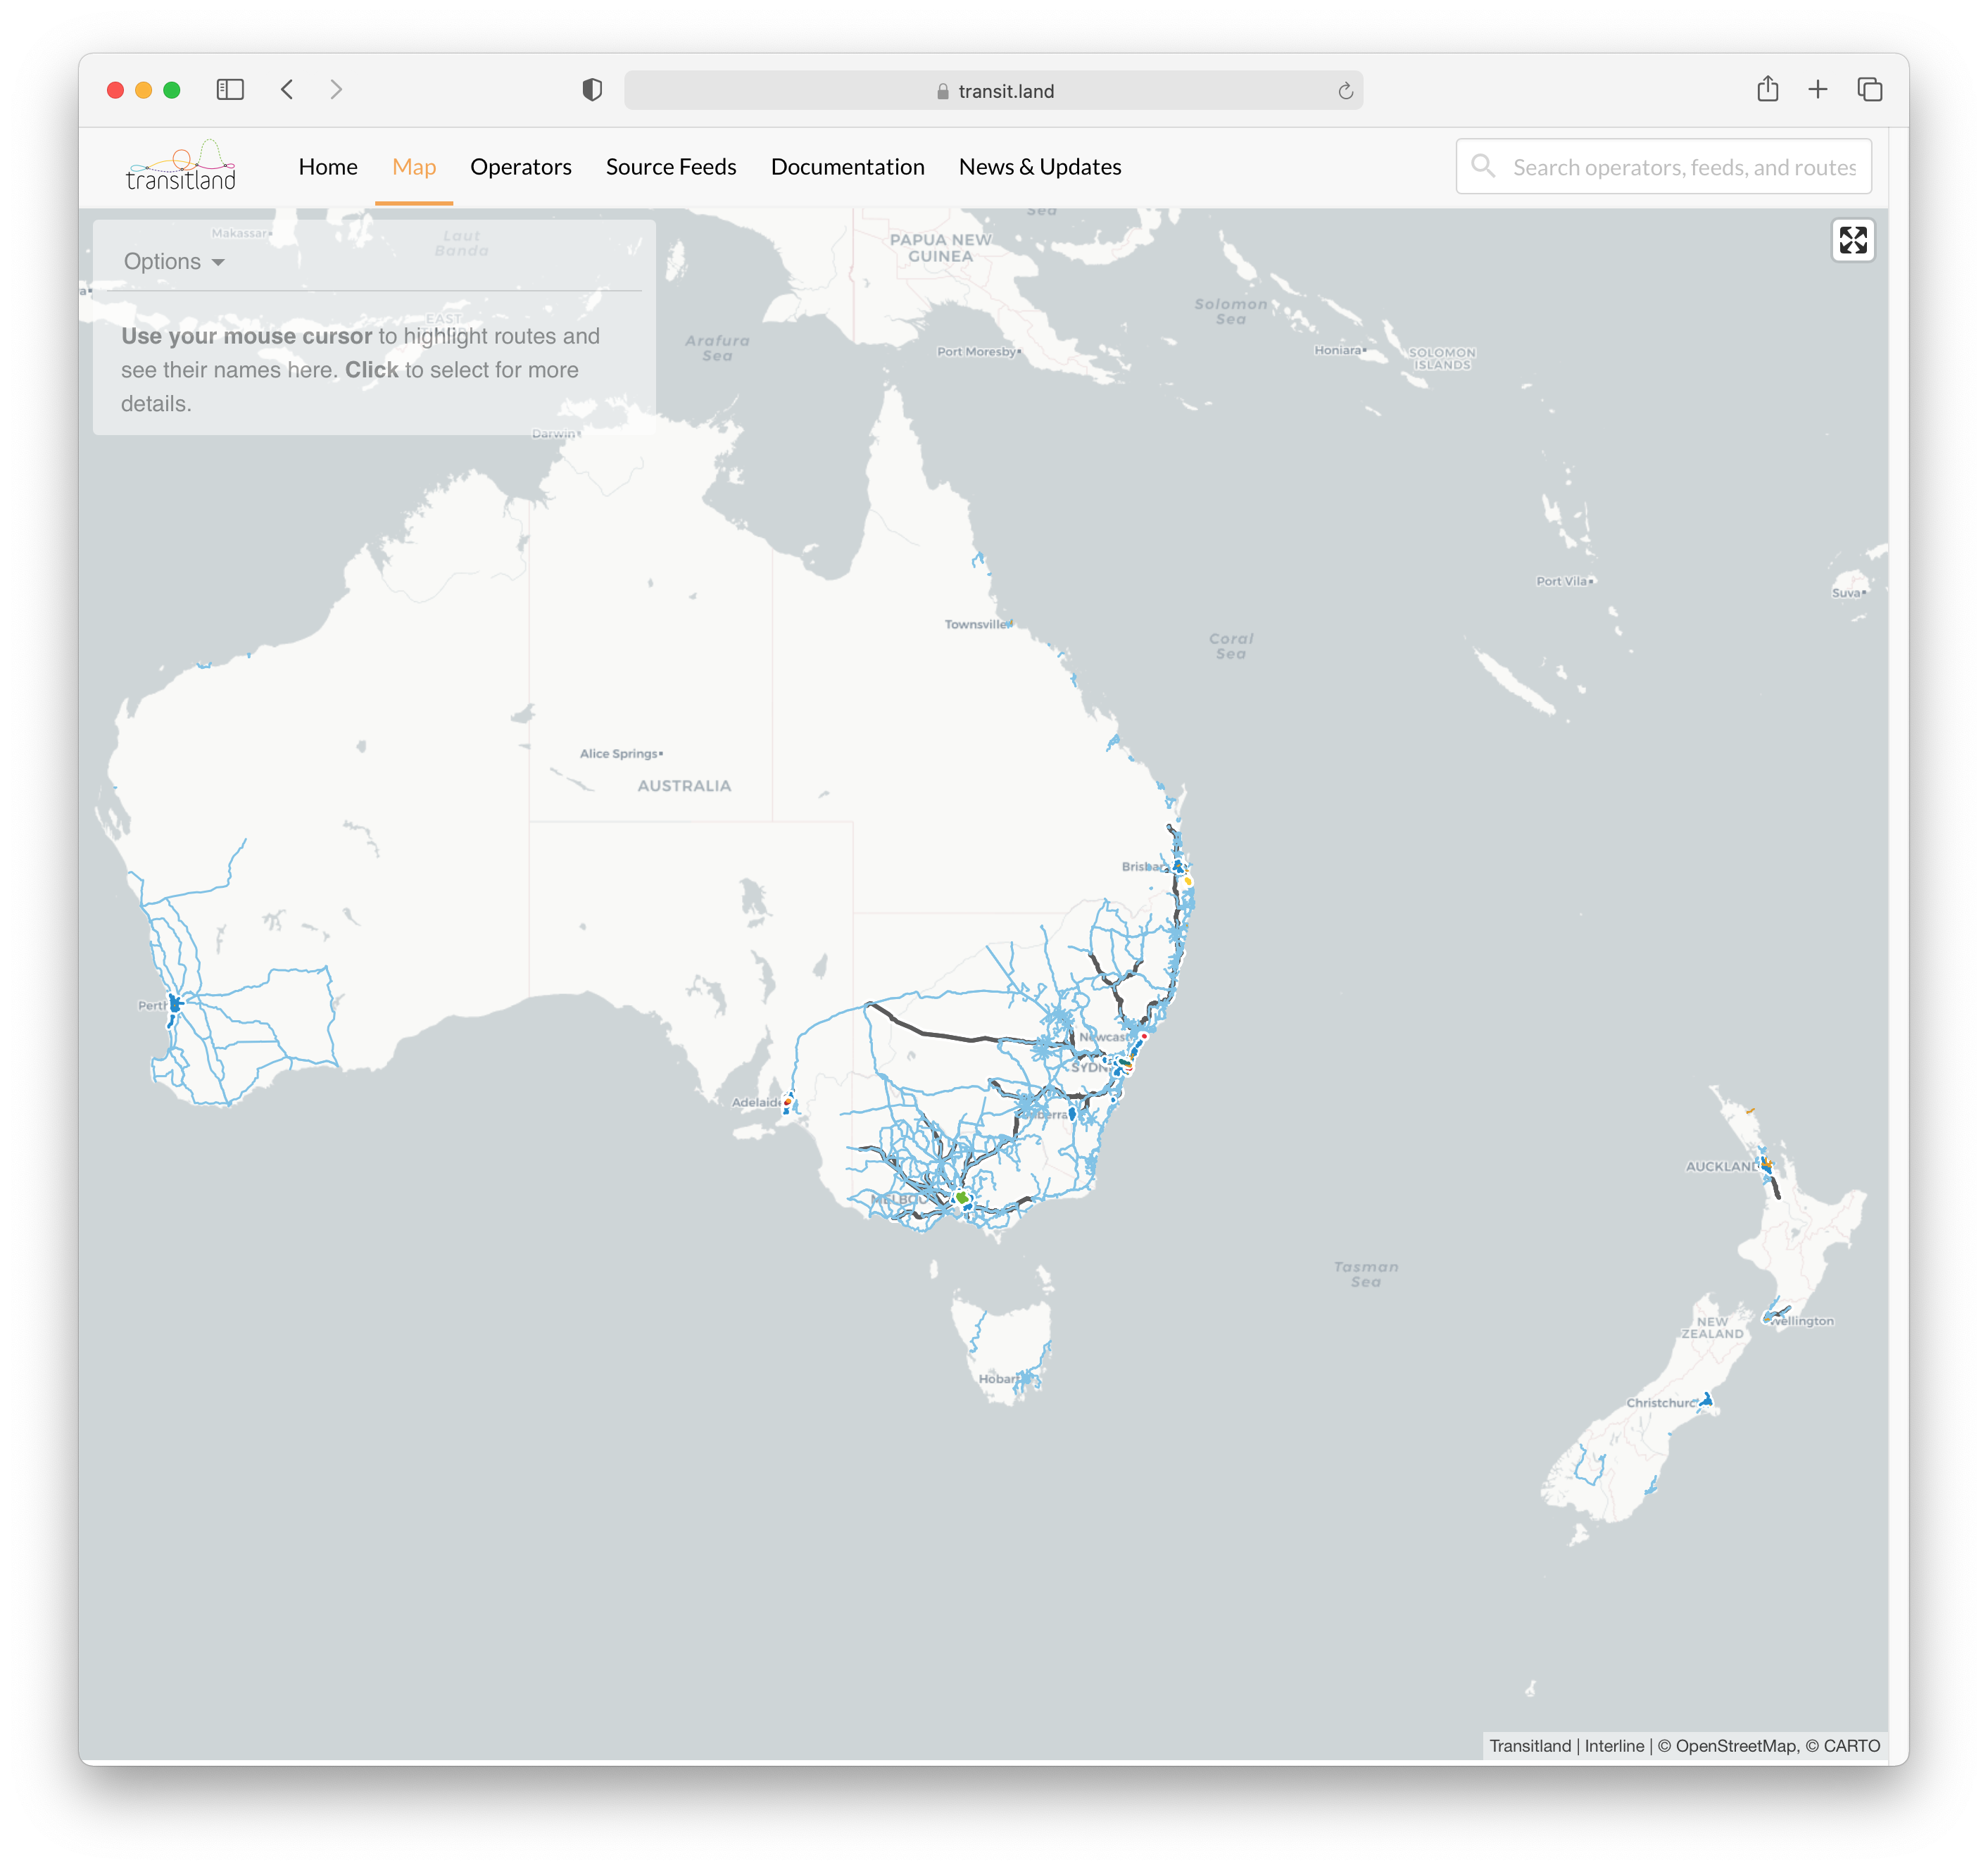 screenshot of Transitland global transit map showing bus, train, subway, and ferry routes across Australia and New Zealand